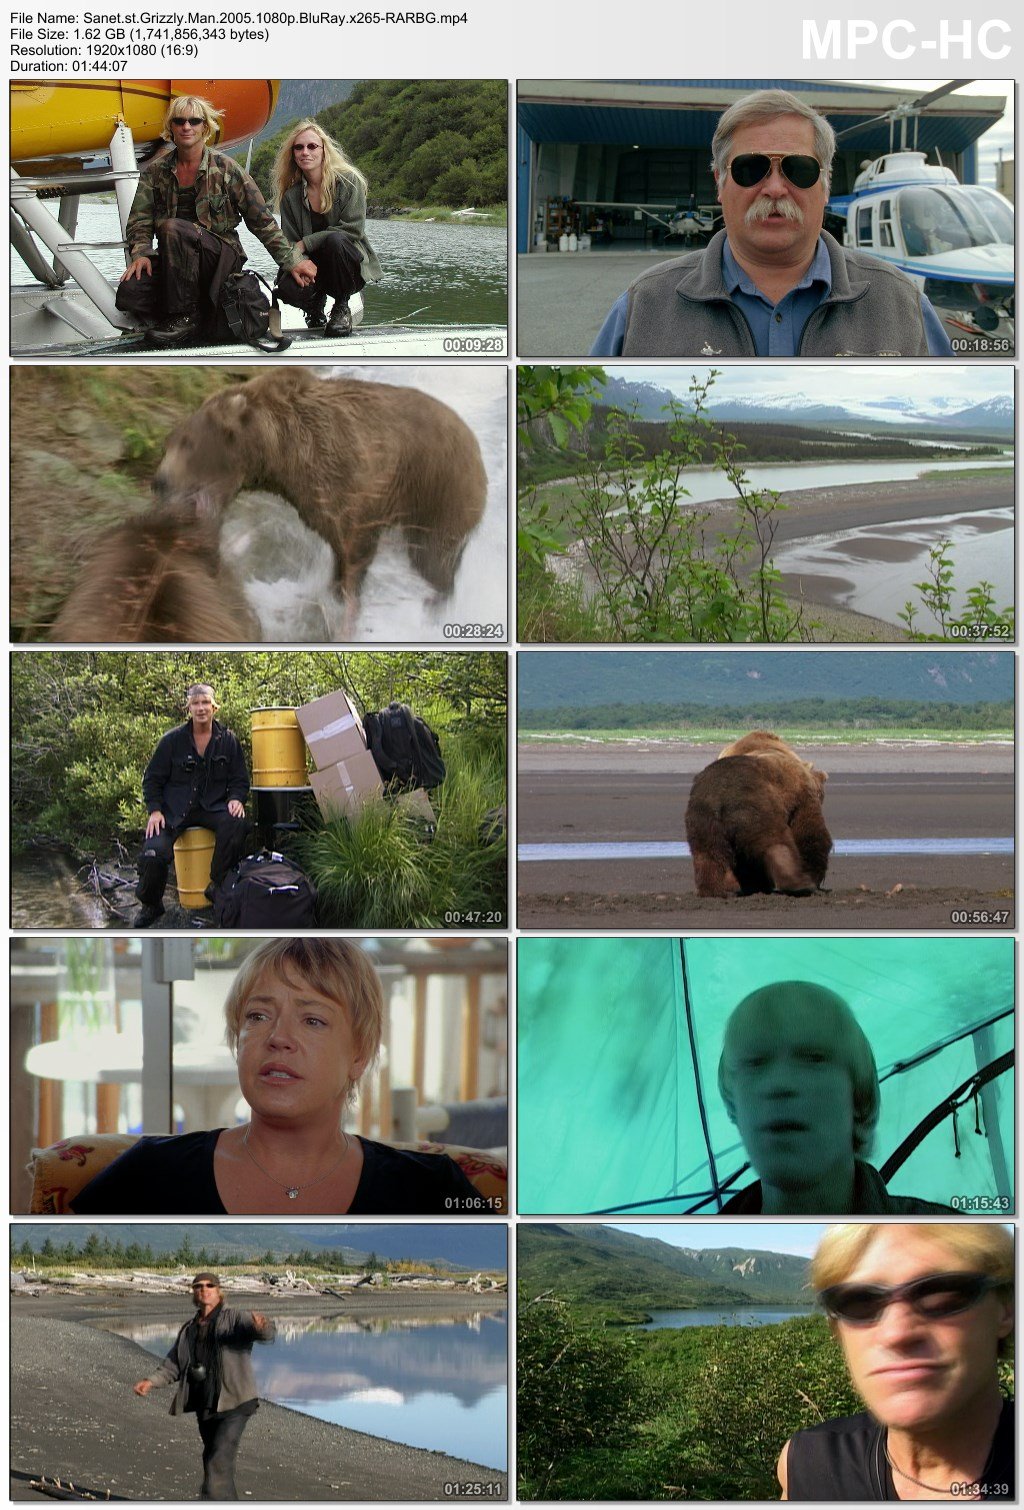 grizzly man soundtrack download